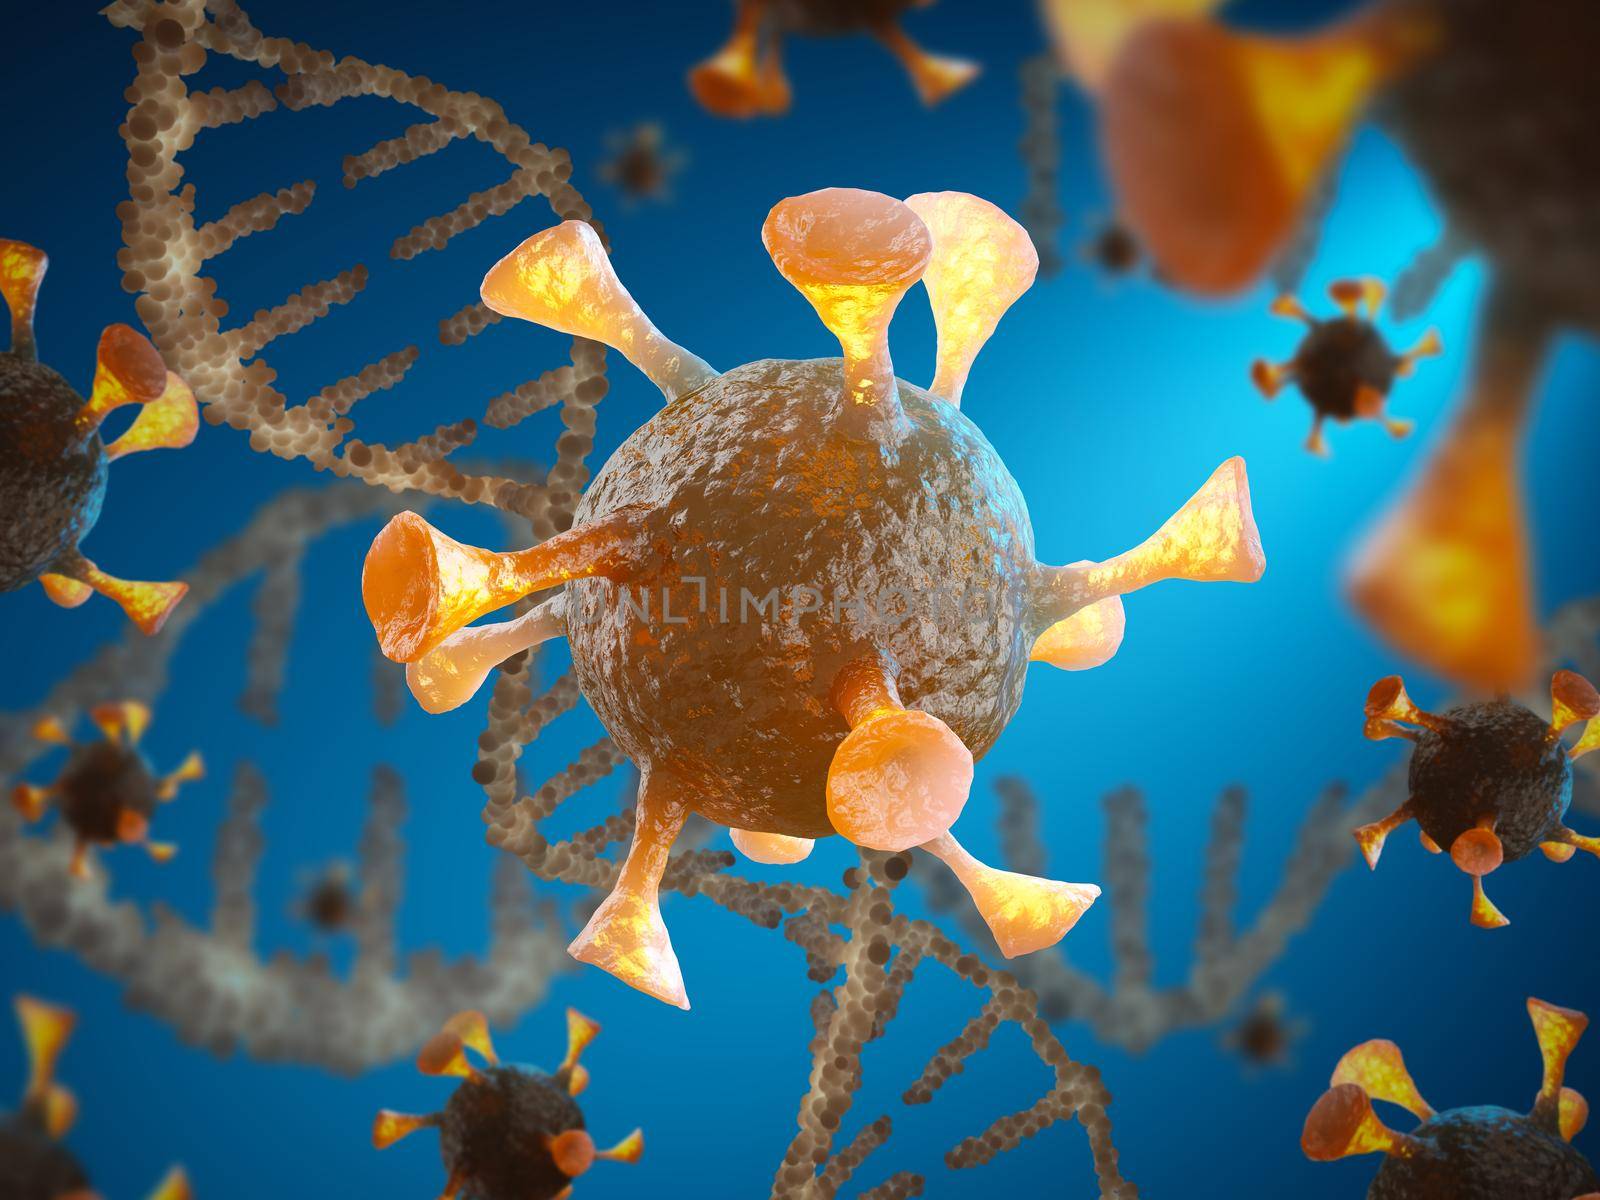 Viruses and dna close-up on a blue background. 3d render.